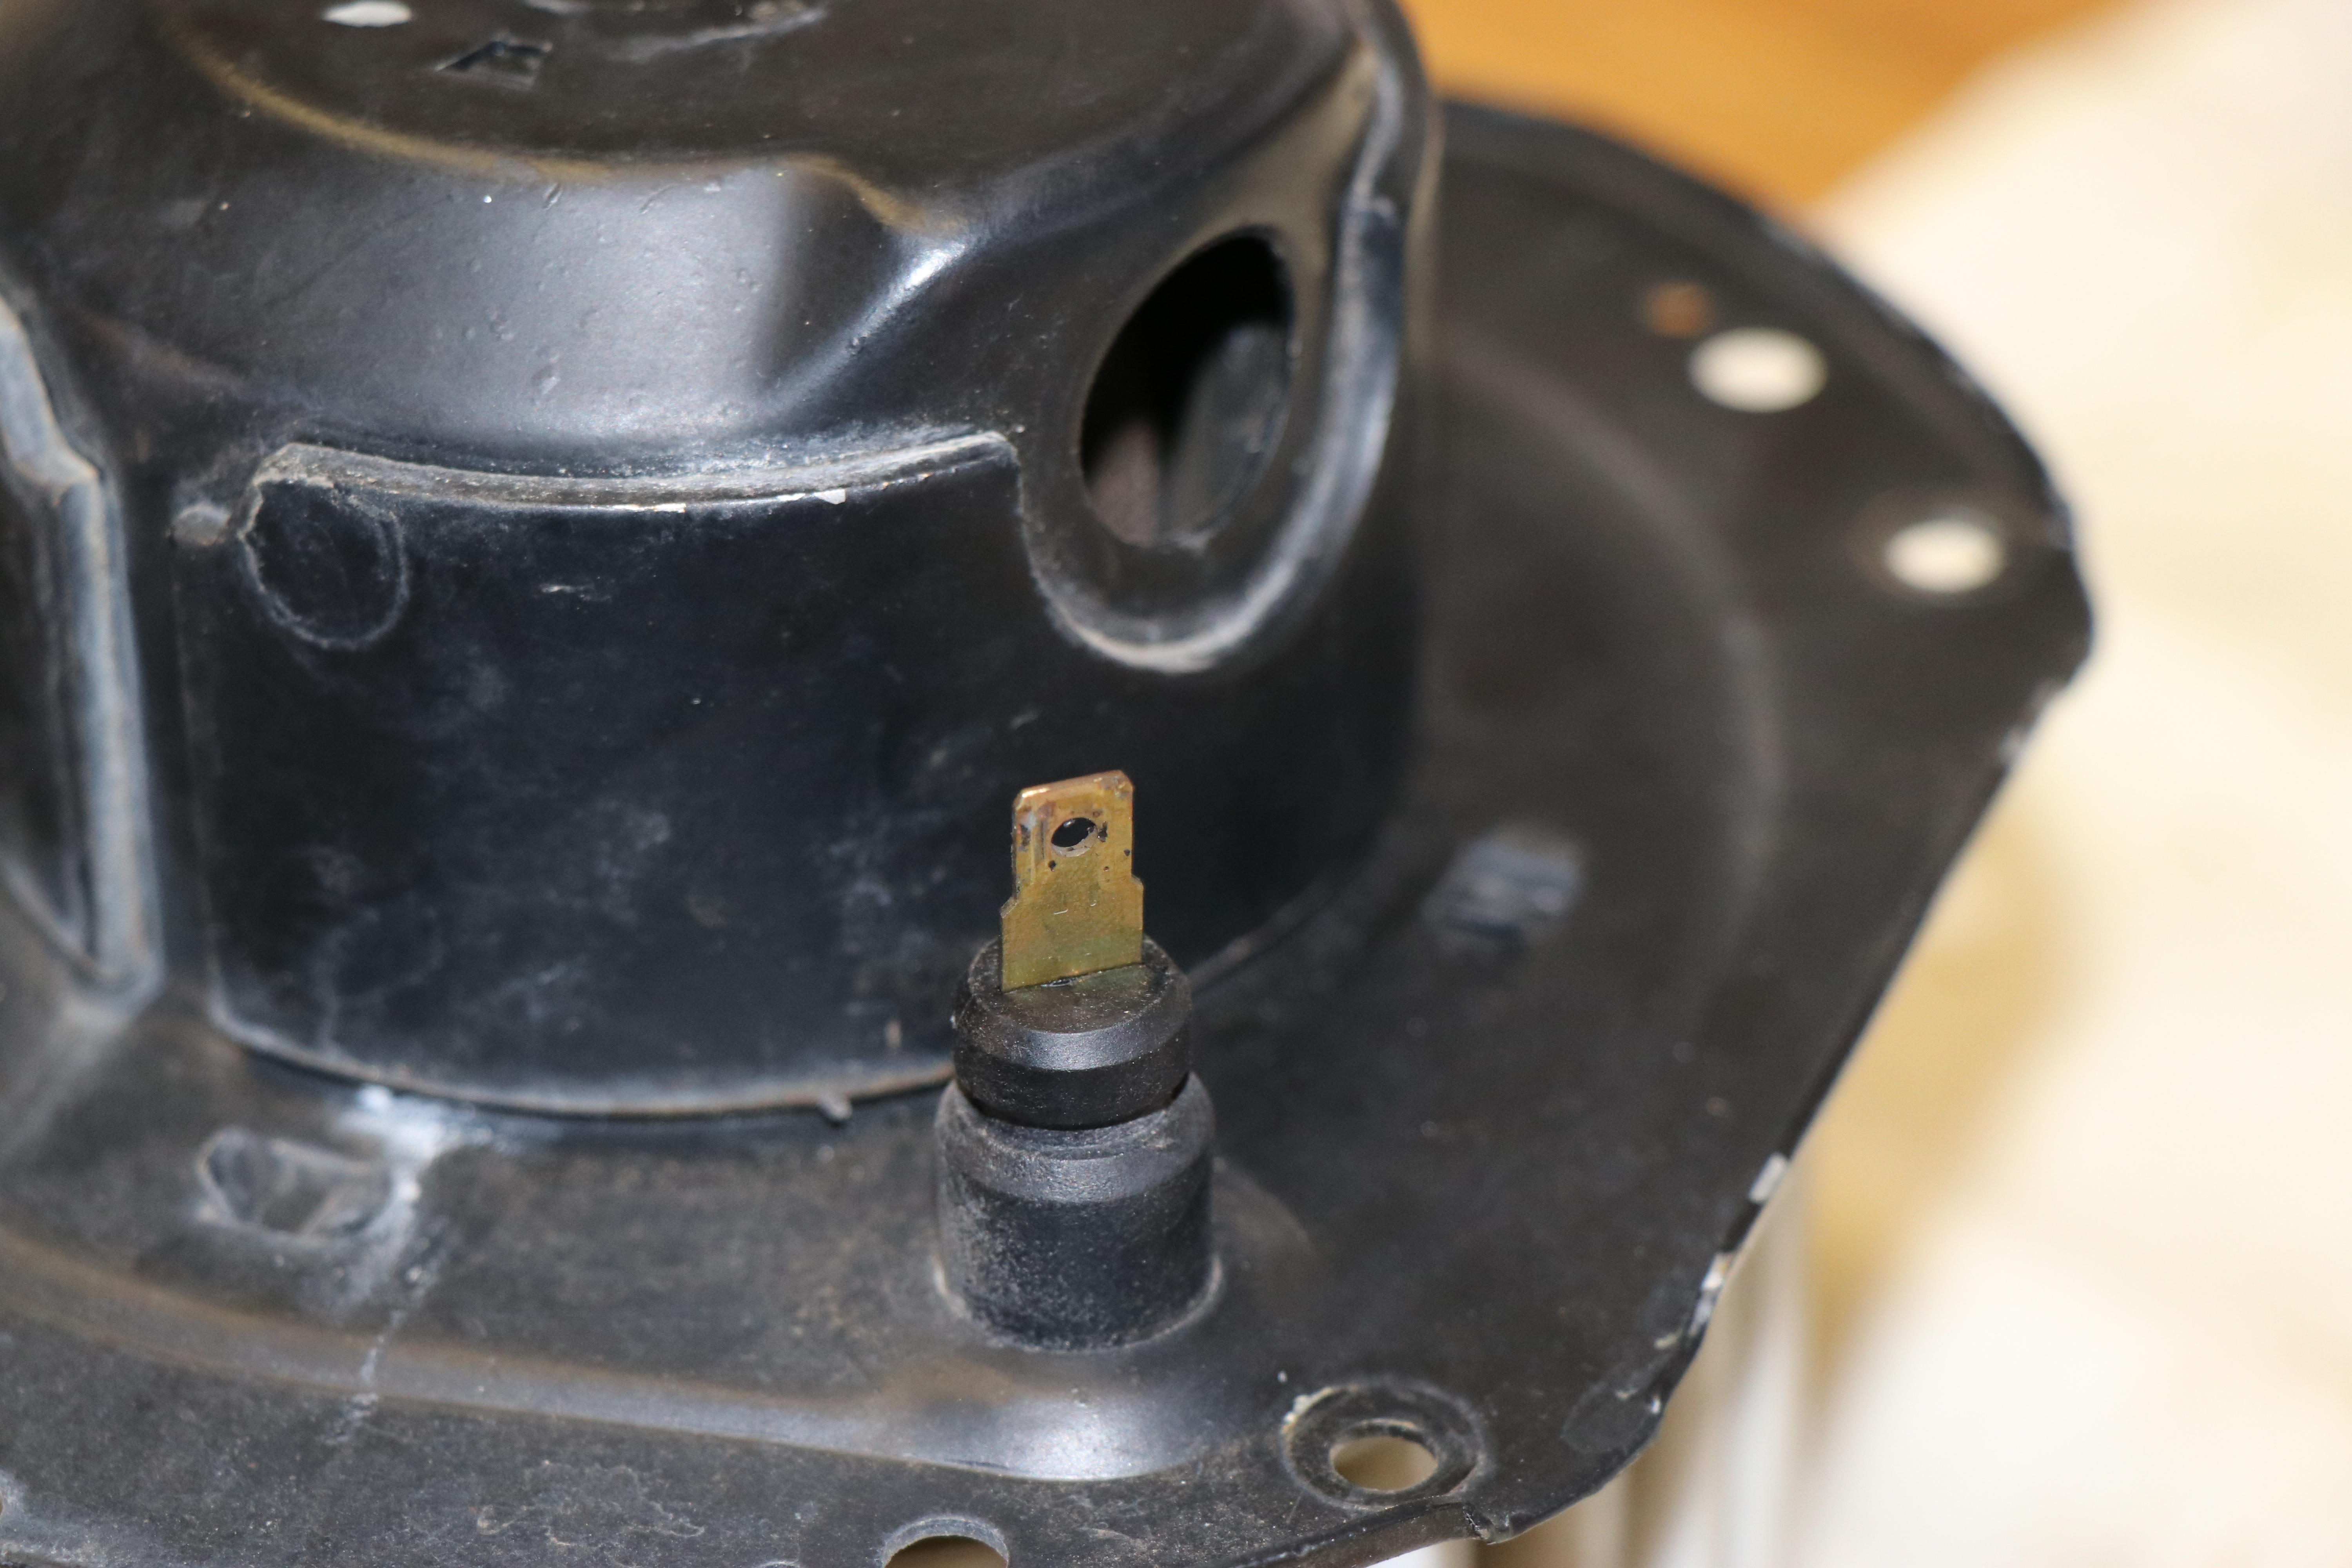 GM motor blower power switch and vent hole